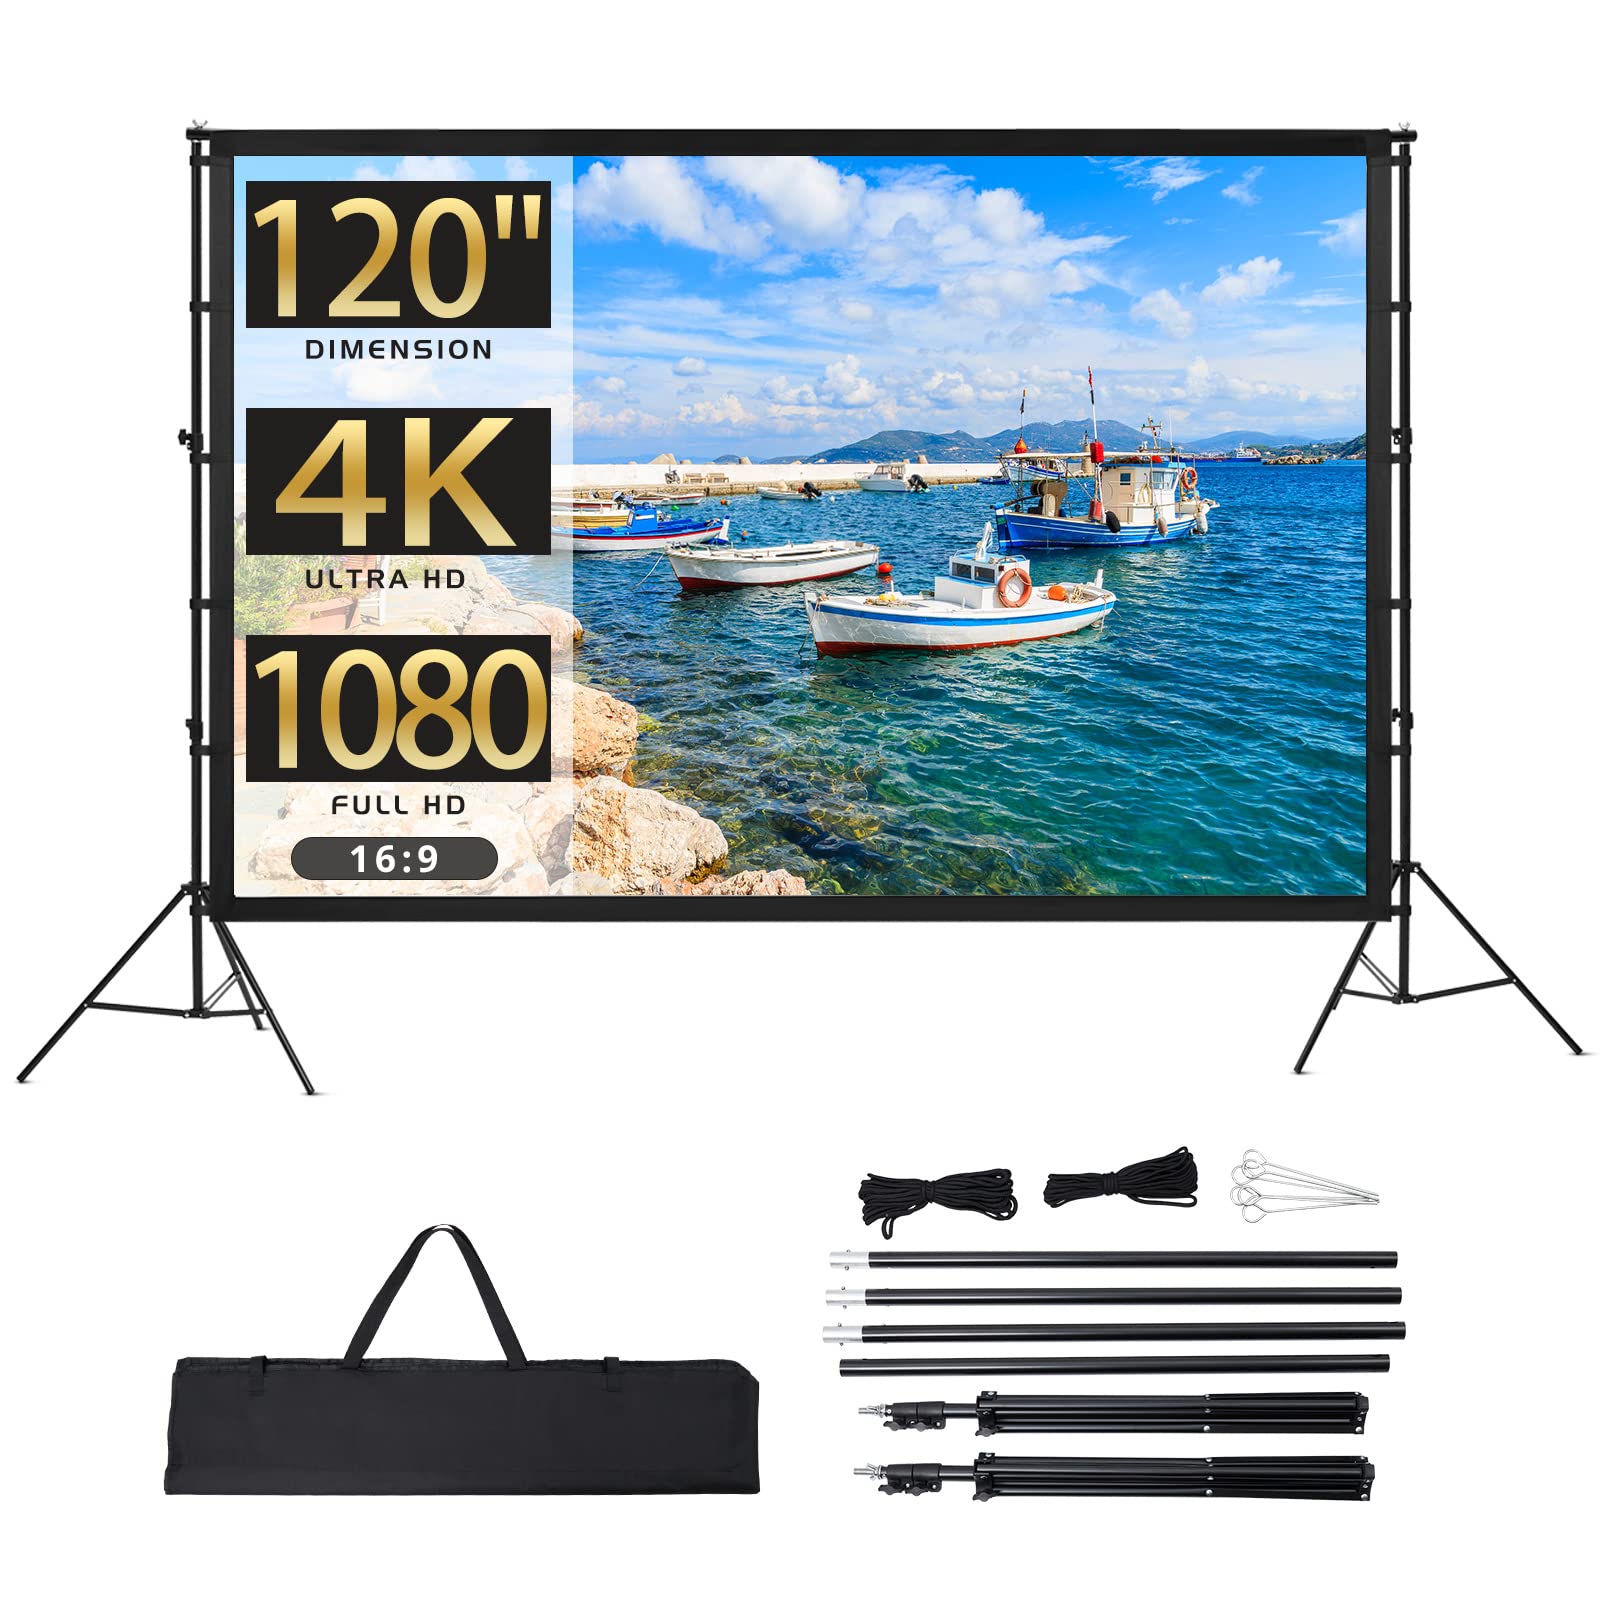 US TOWALLMARK Projector Screen With Stand 120 Inch 16:9 4K HD Rear & Front Projections Movies Screen With Carry Bag